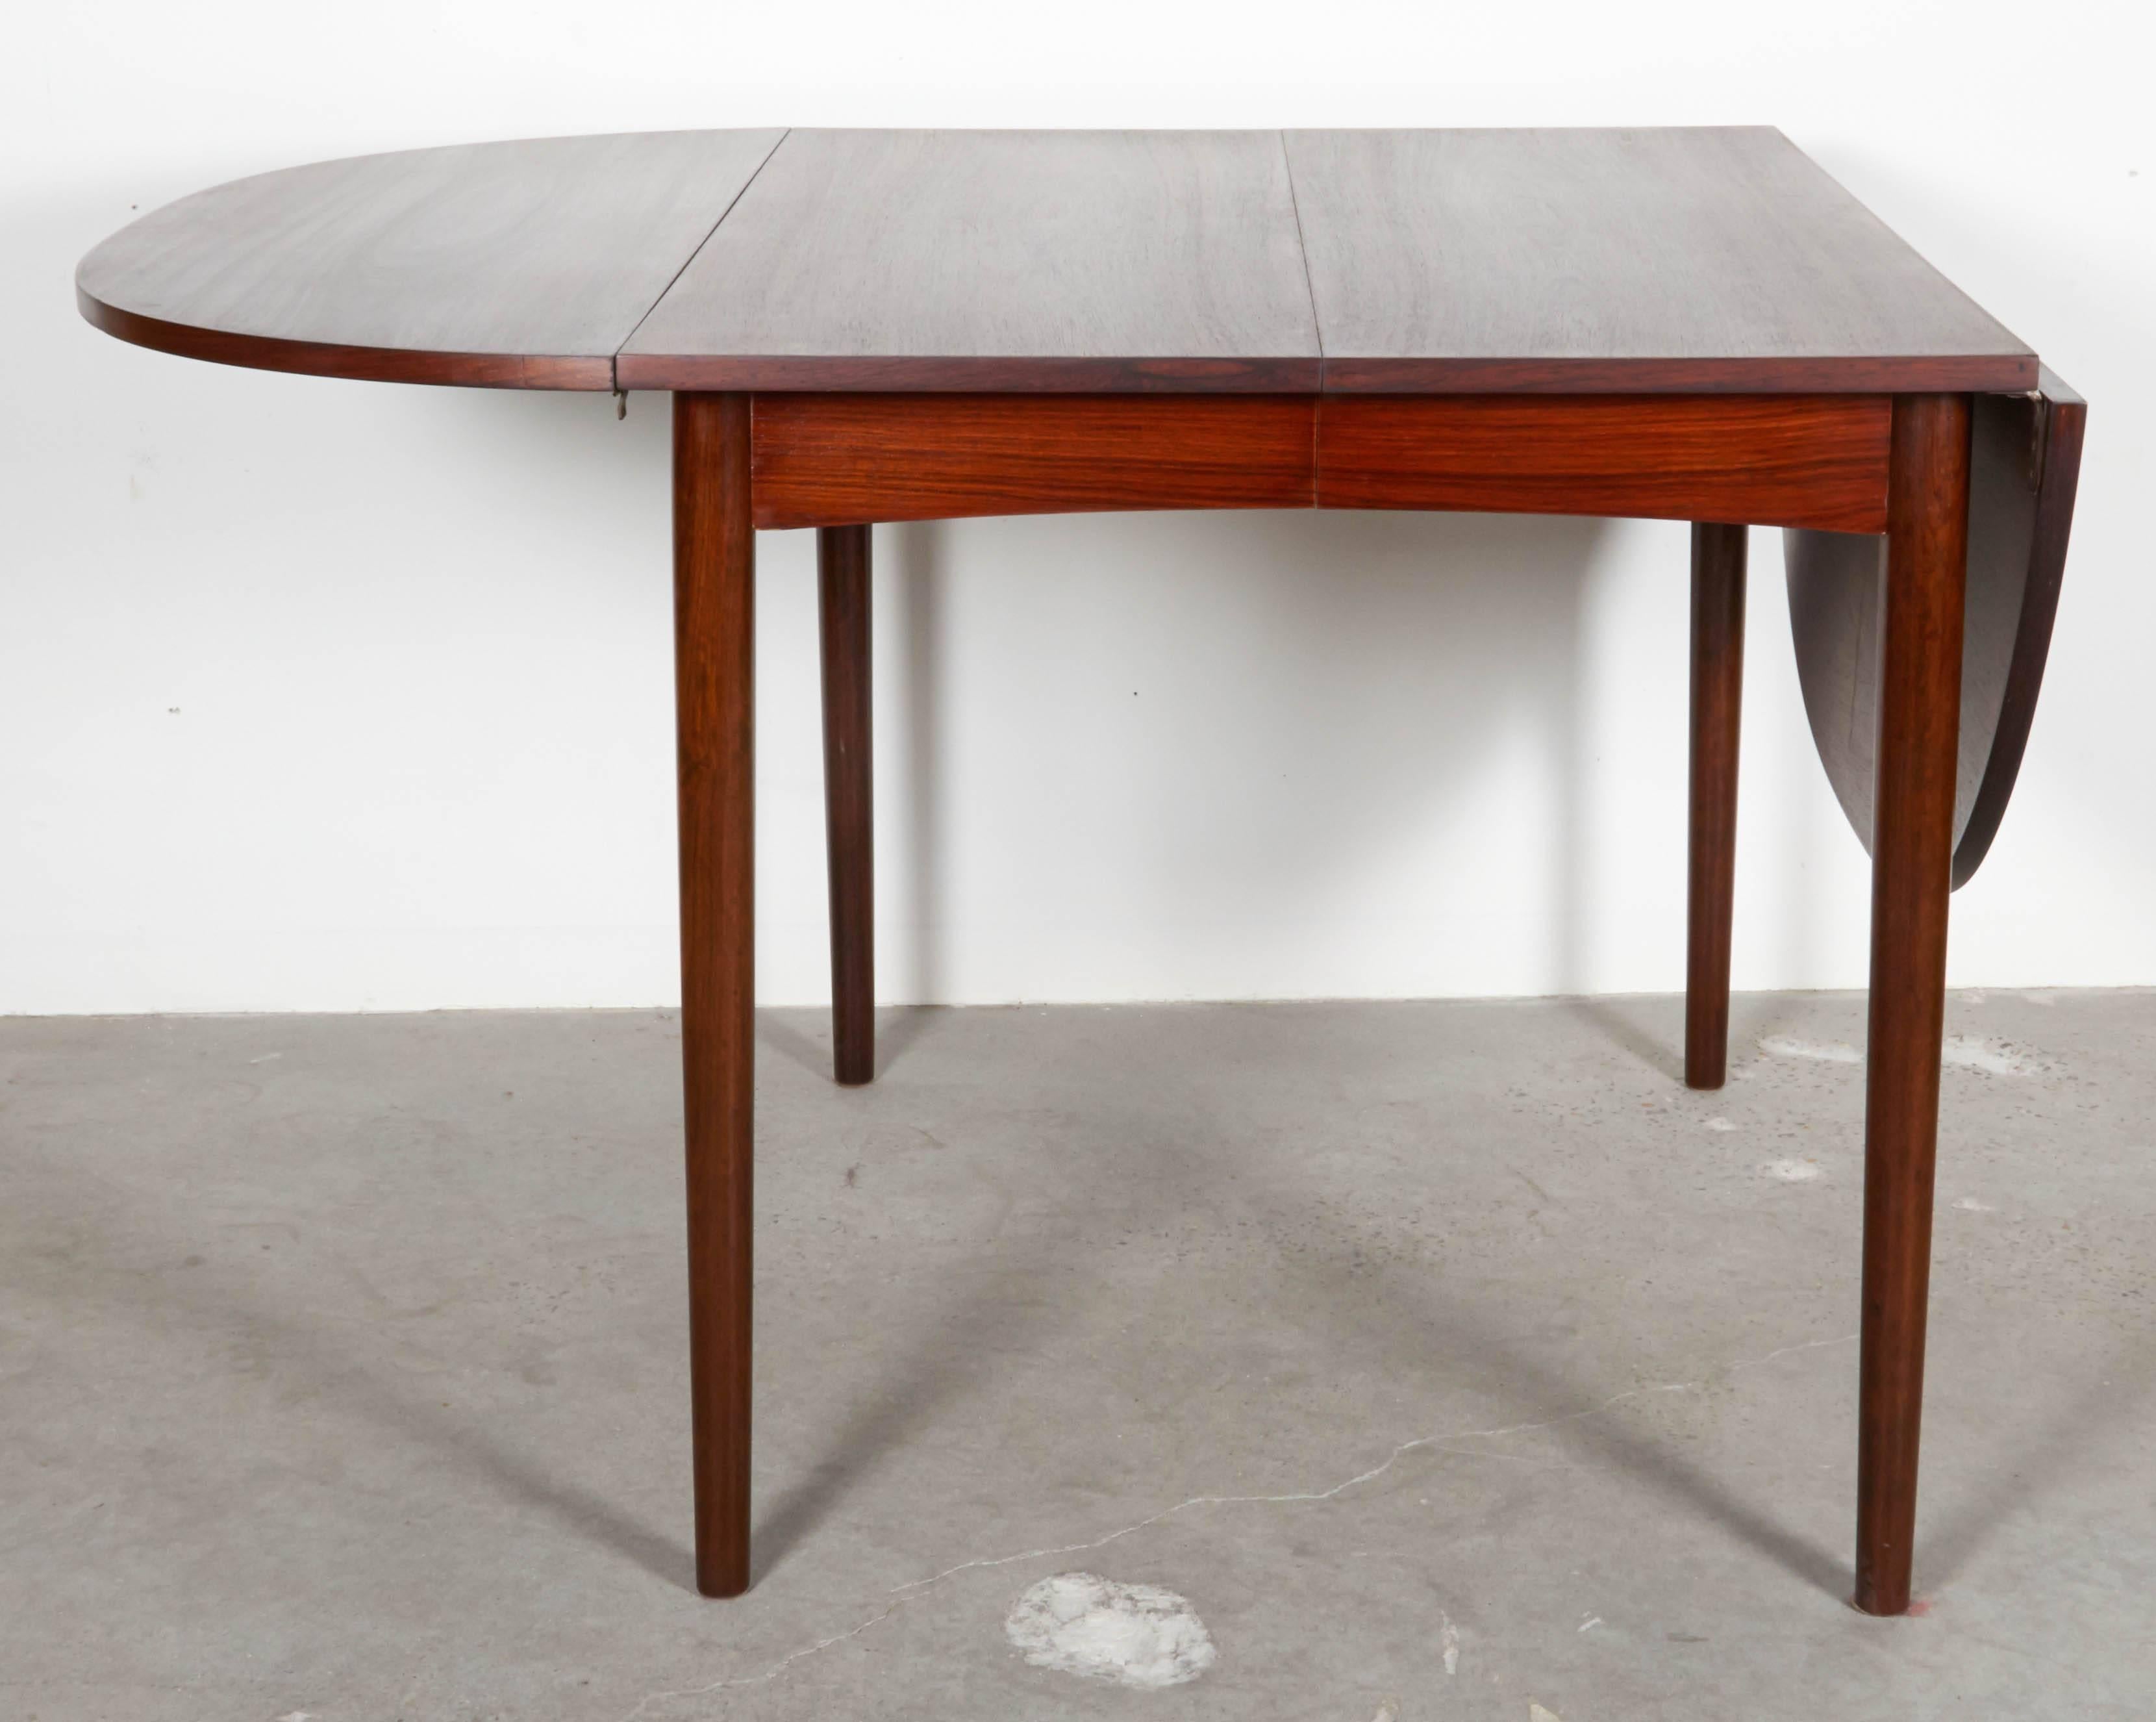 Vintage 1960s Rosewood Dining Table with Drop Leaves

This Vintage Dining Table can break down to 29